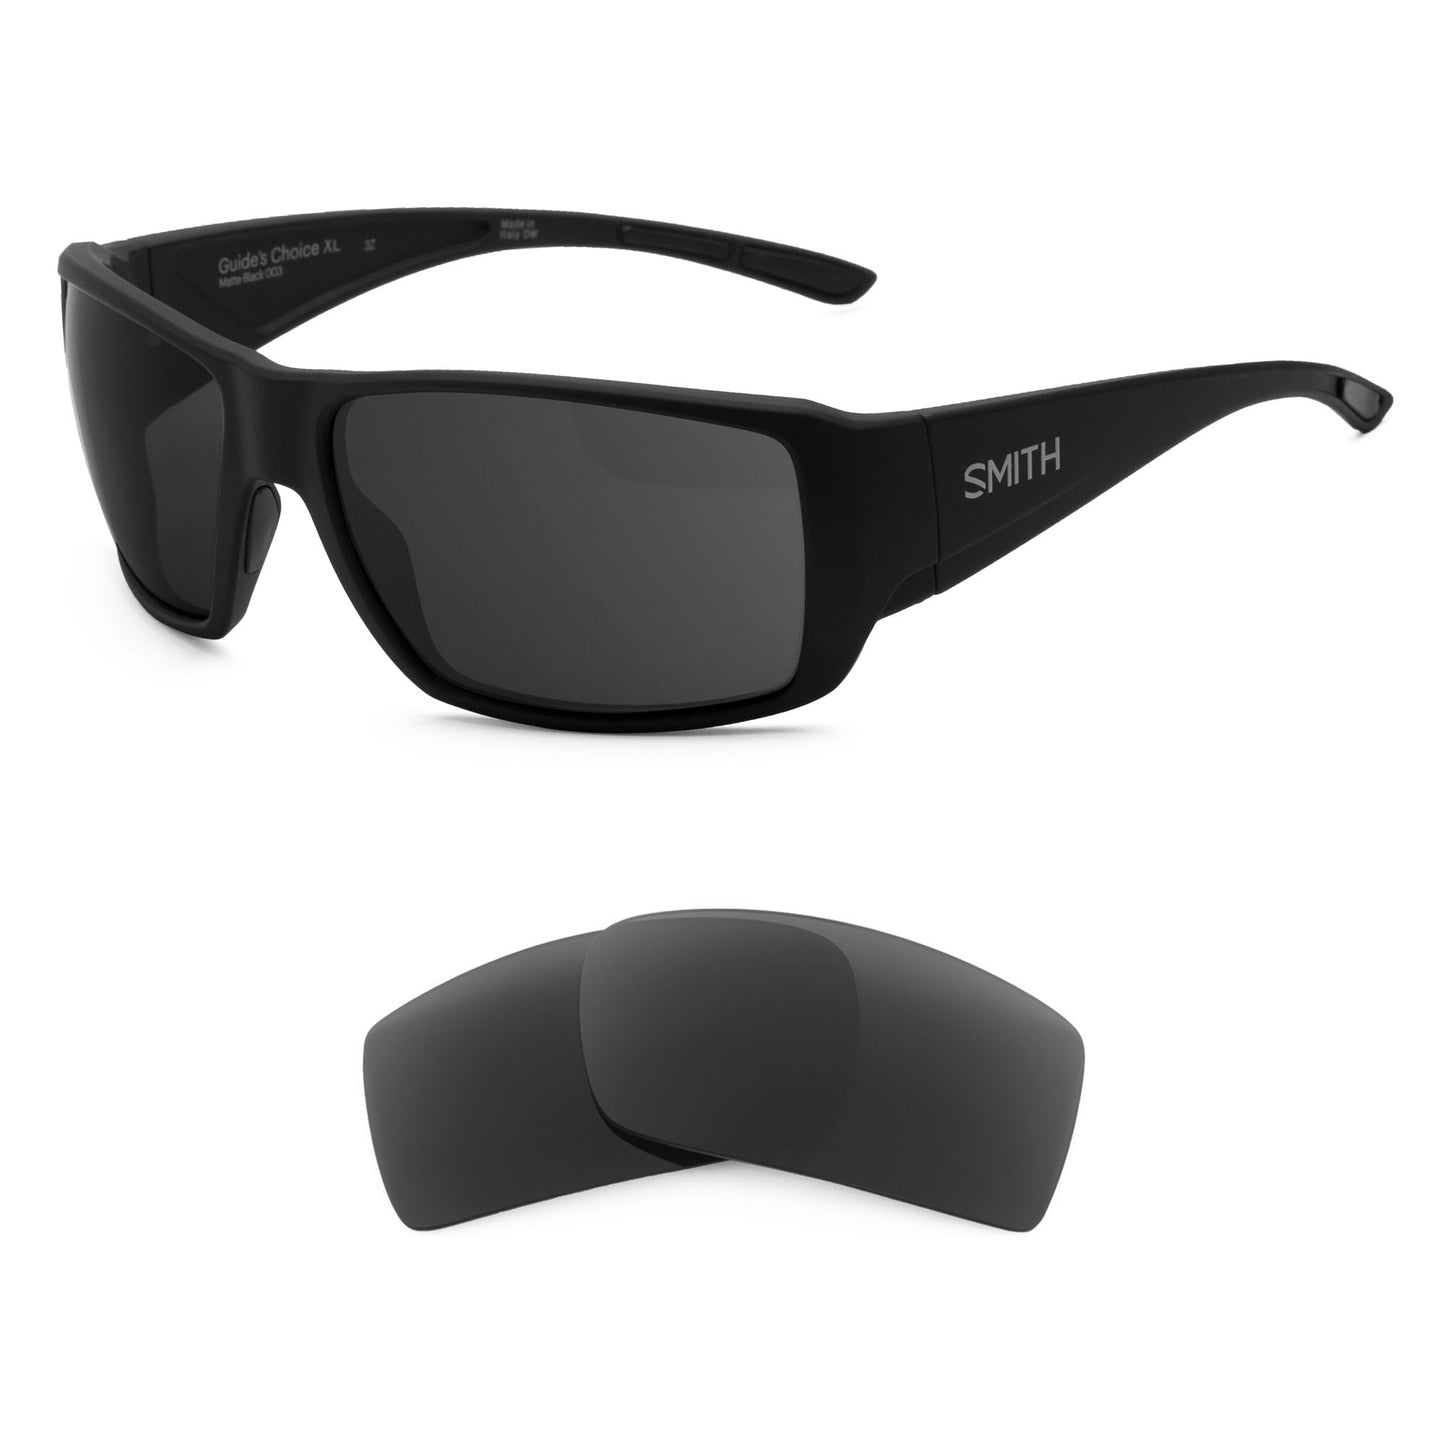 Smith Guide's Choice XL sunglasses with replacement lenses